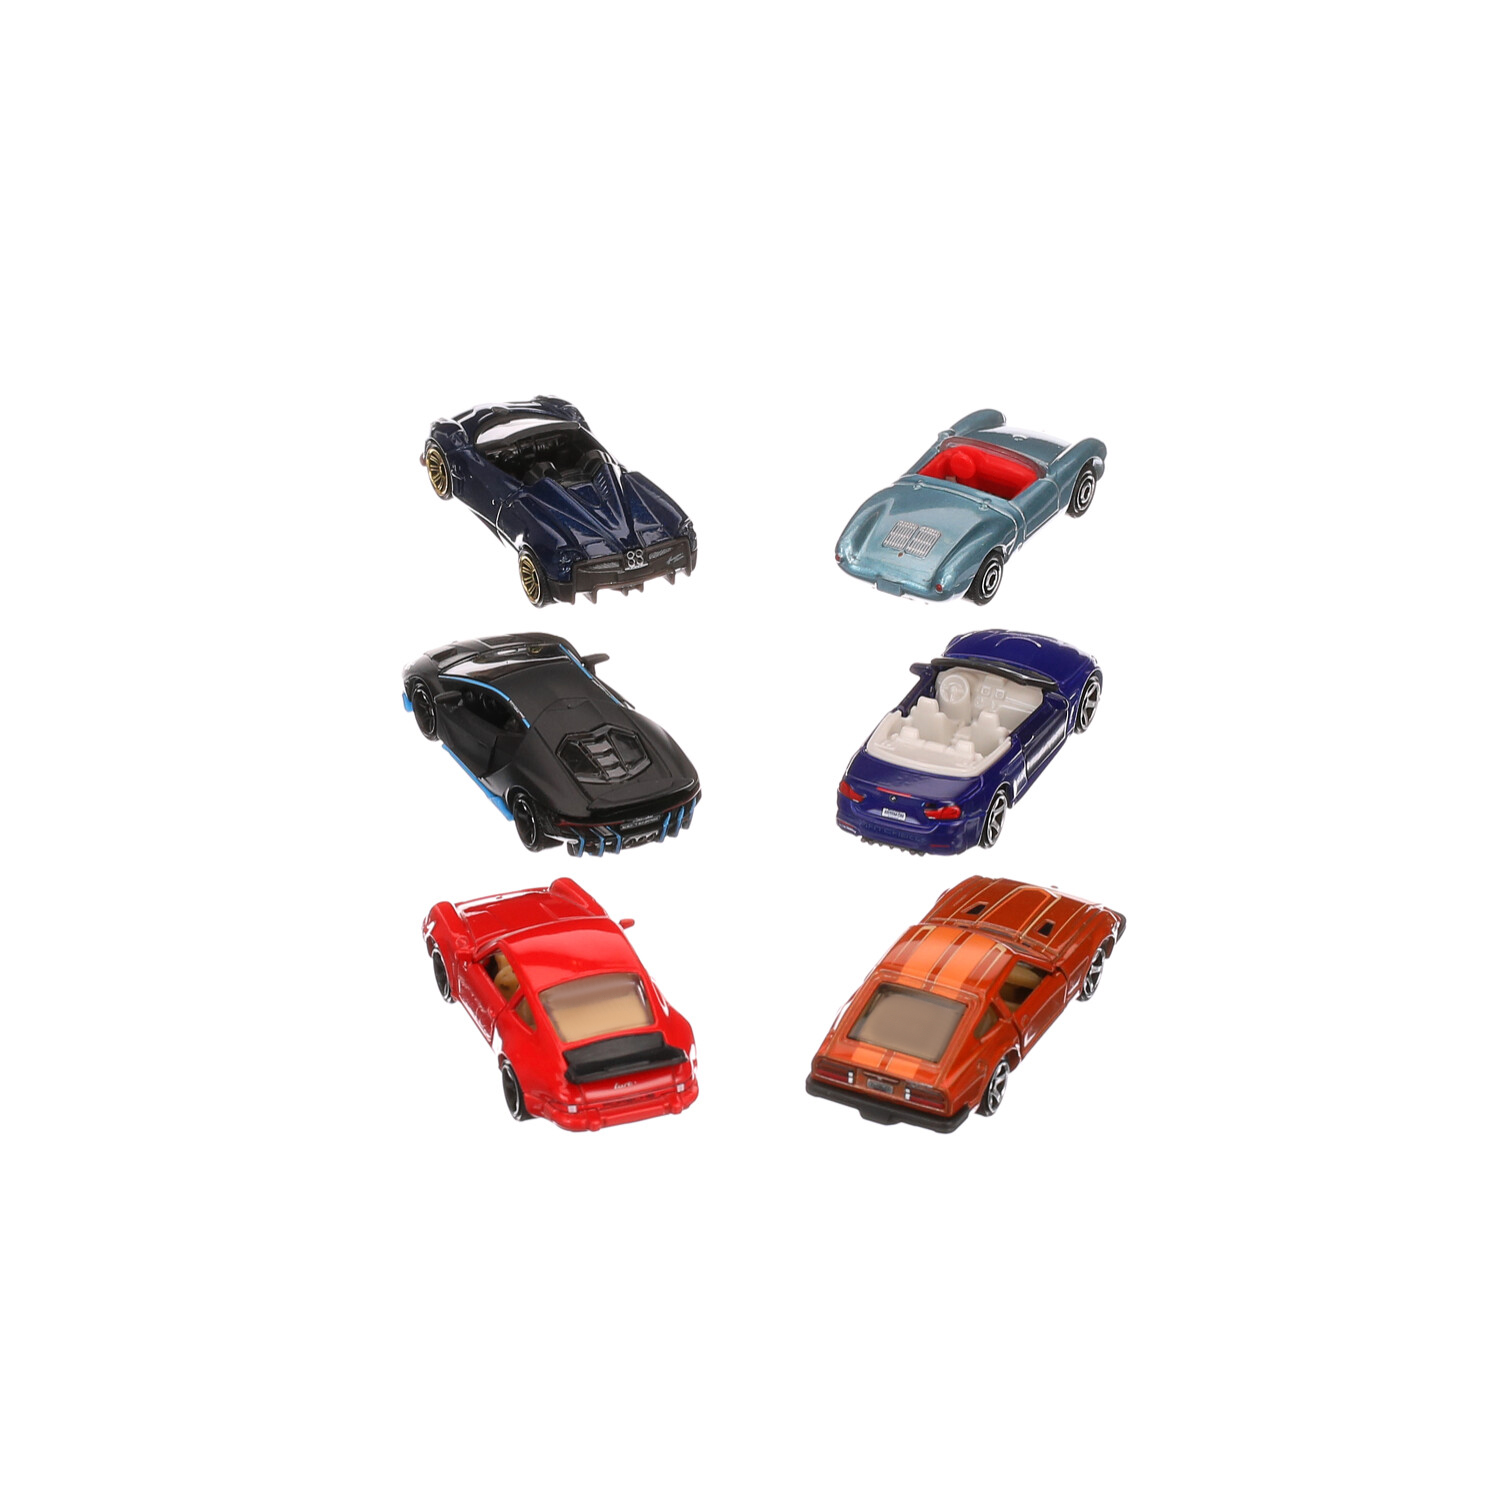 Matchbox Moving Parts 6-Pack of Toy Sports Cars in 1:64 Scale with